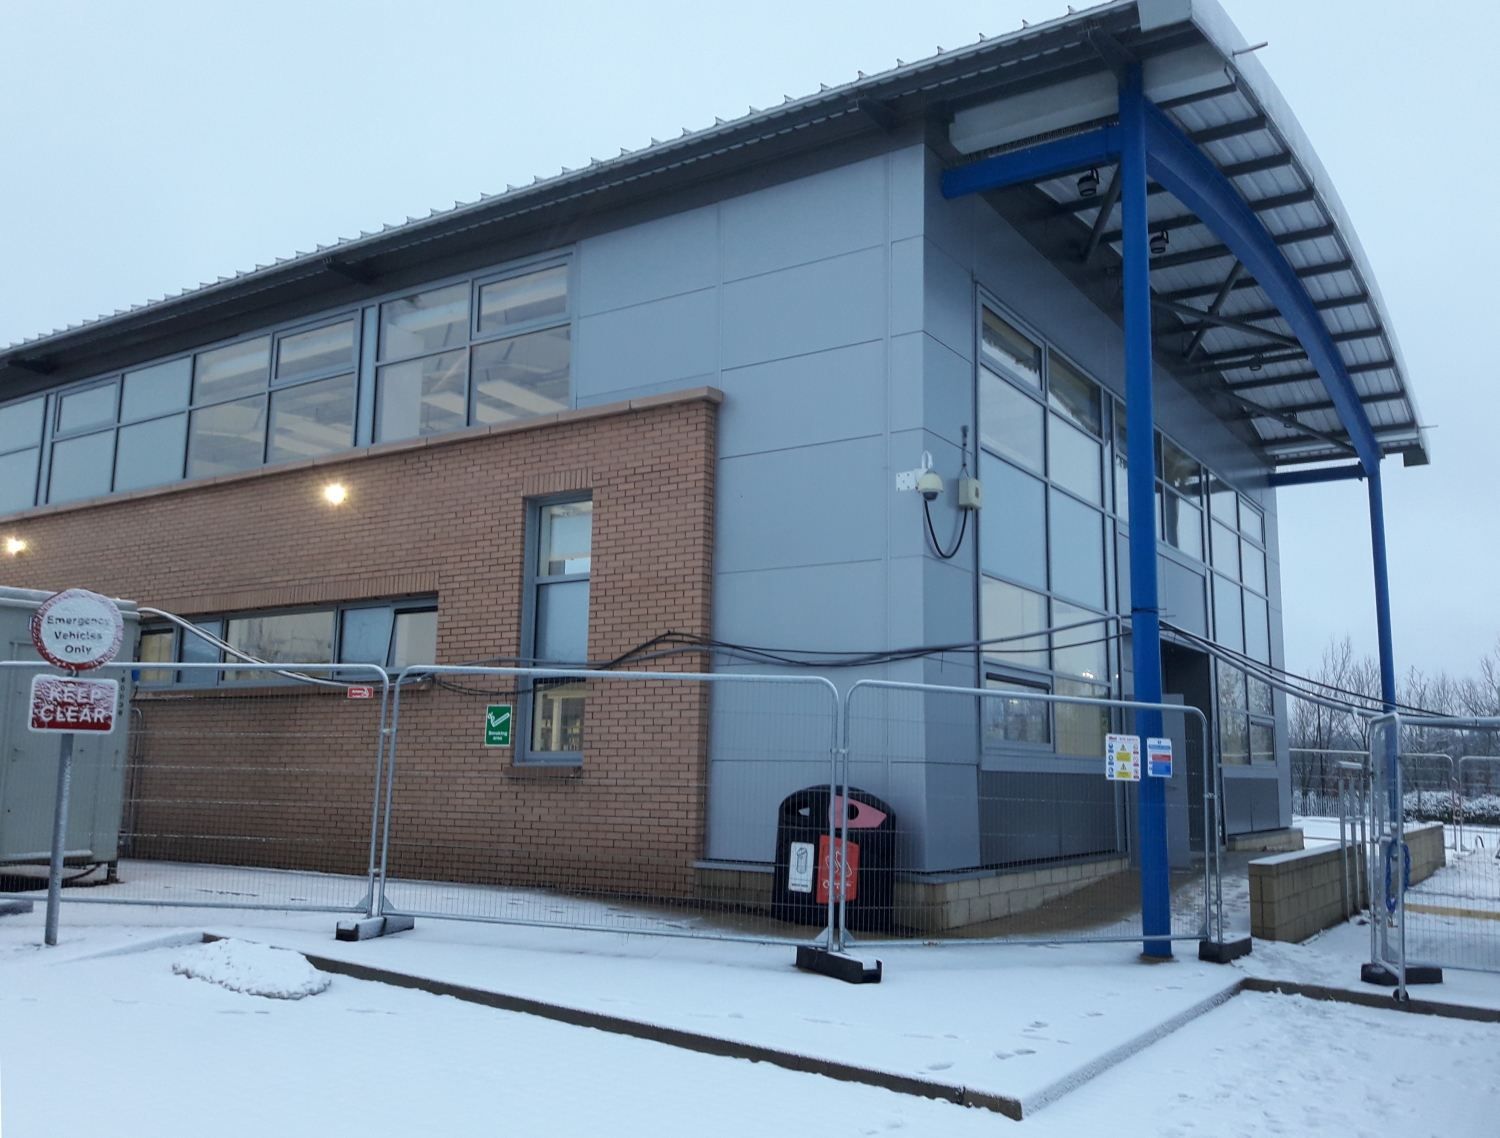 Maxi starts work on first CCS Framework contract for West Lothian College